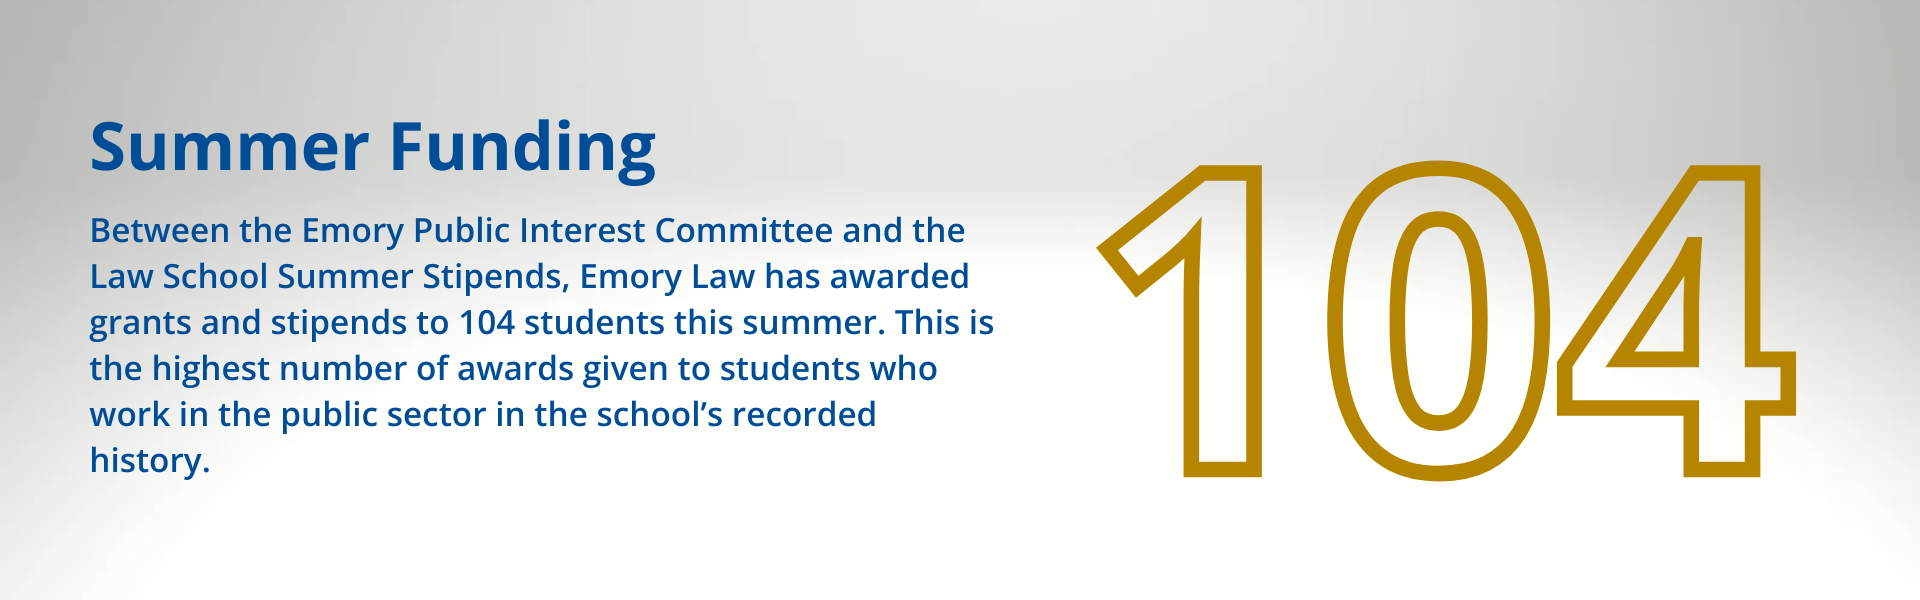 Emory Law is offering stipends to 104 students